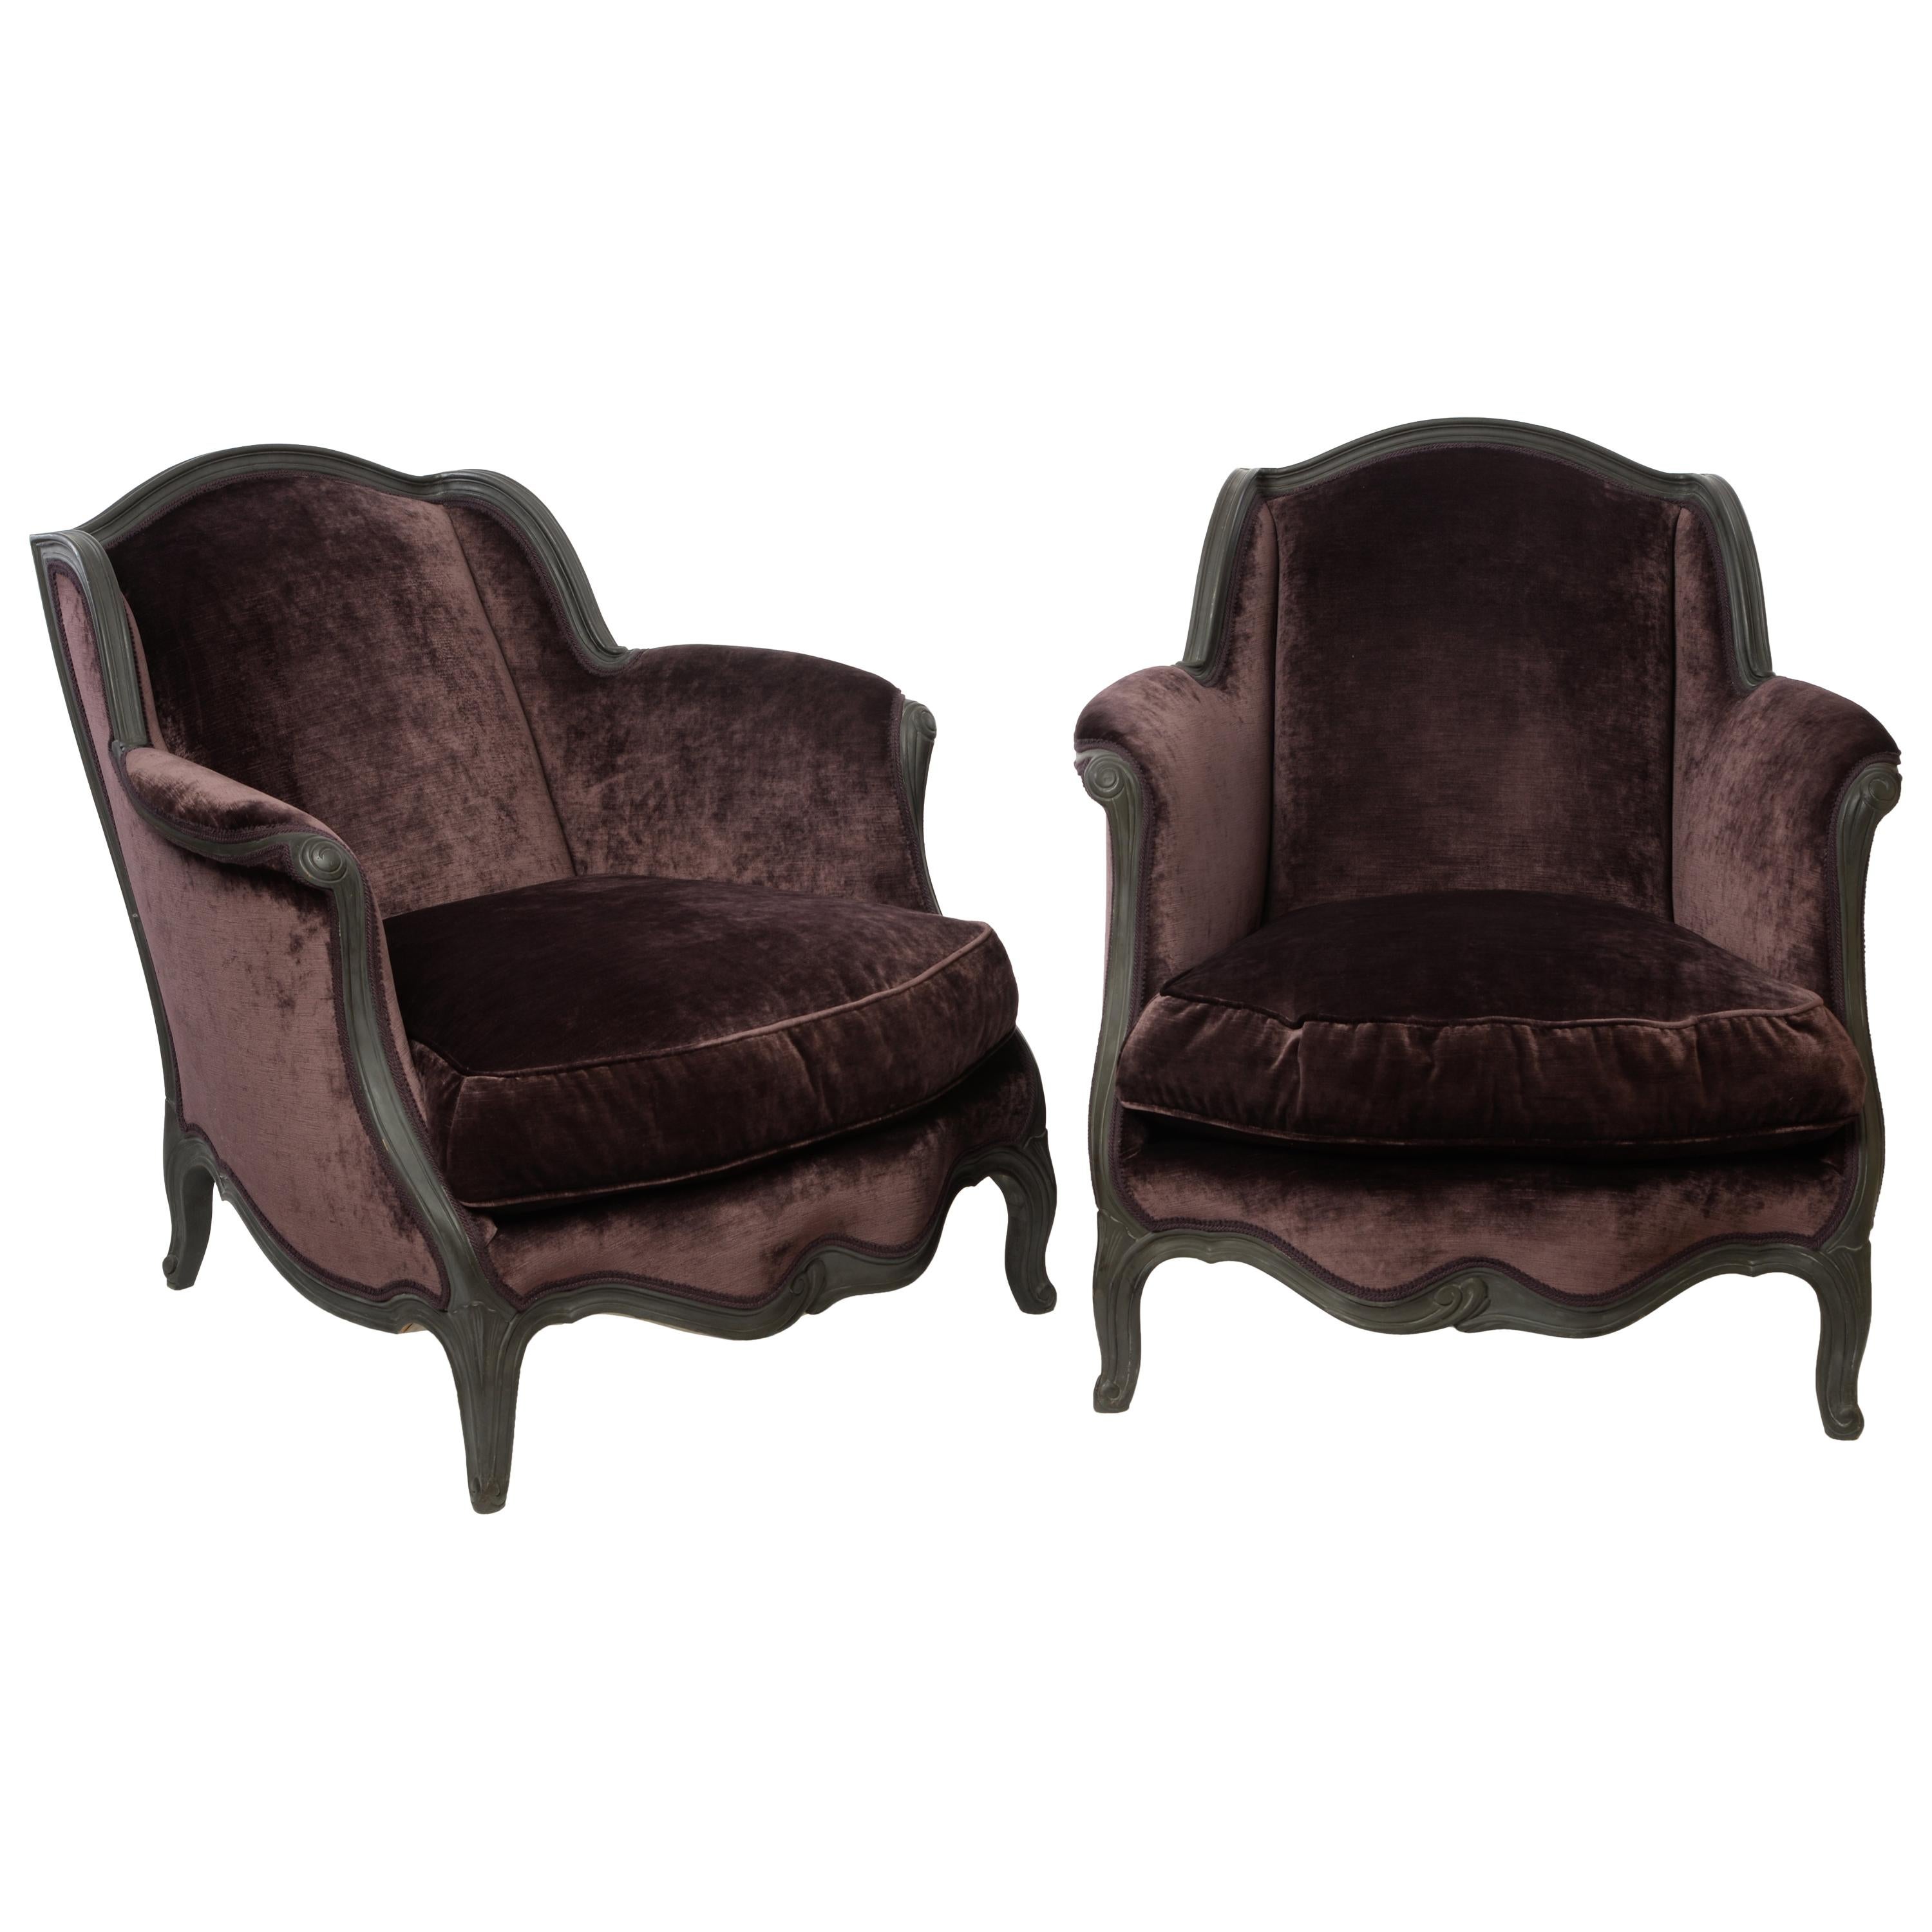 Pair of Bergere Chairs For Sale